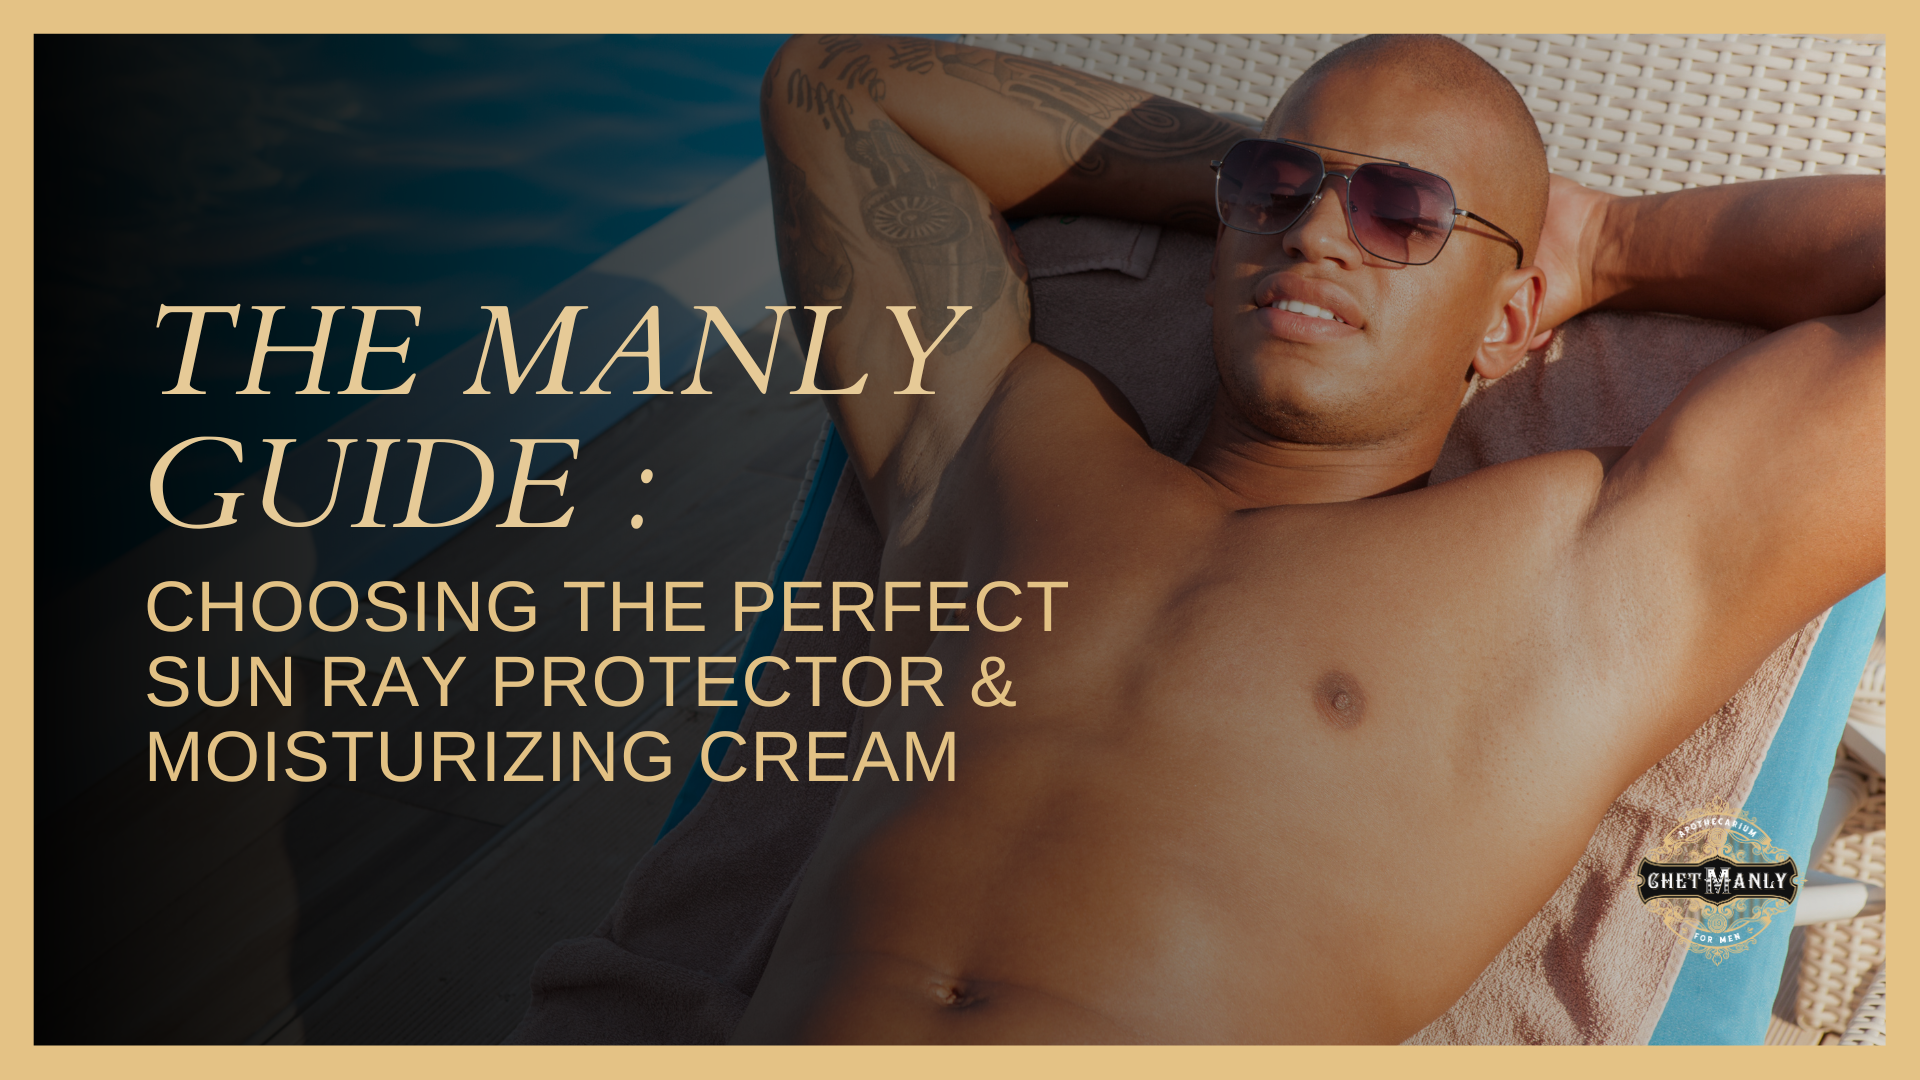 Chet Manly's Guide: Choosing the Perfect Sun Ray Protector & Moisturizing Cream